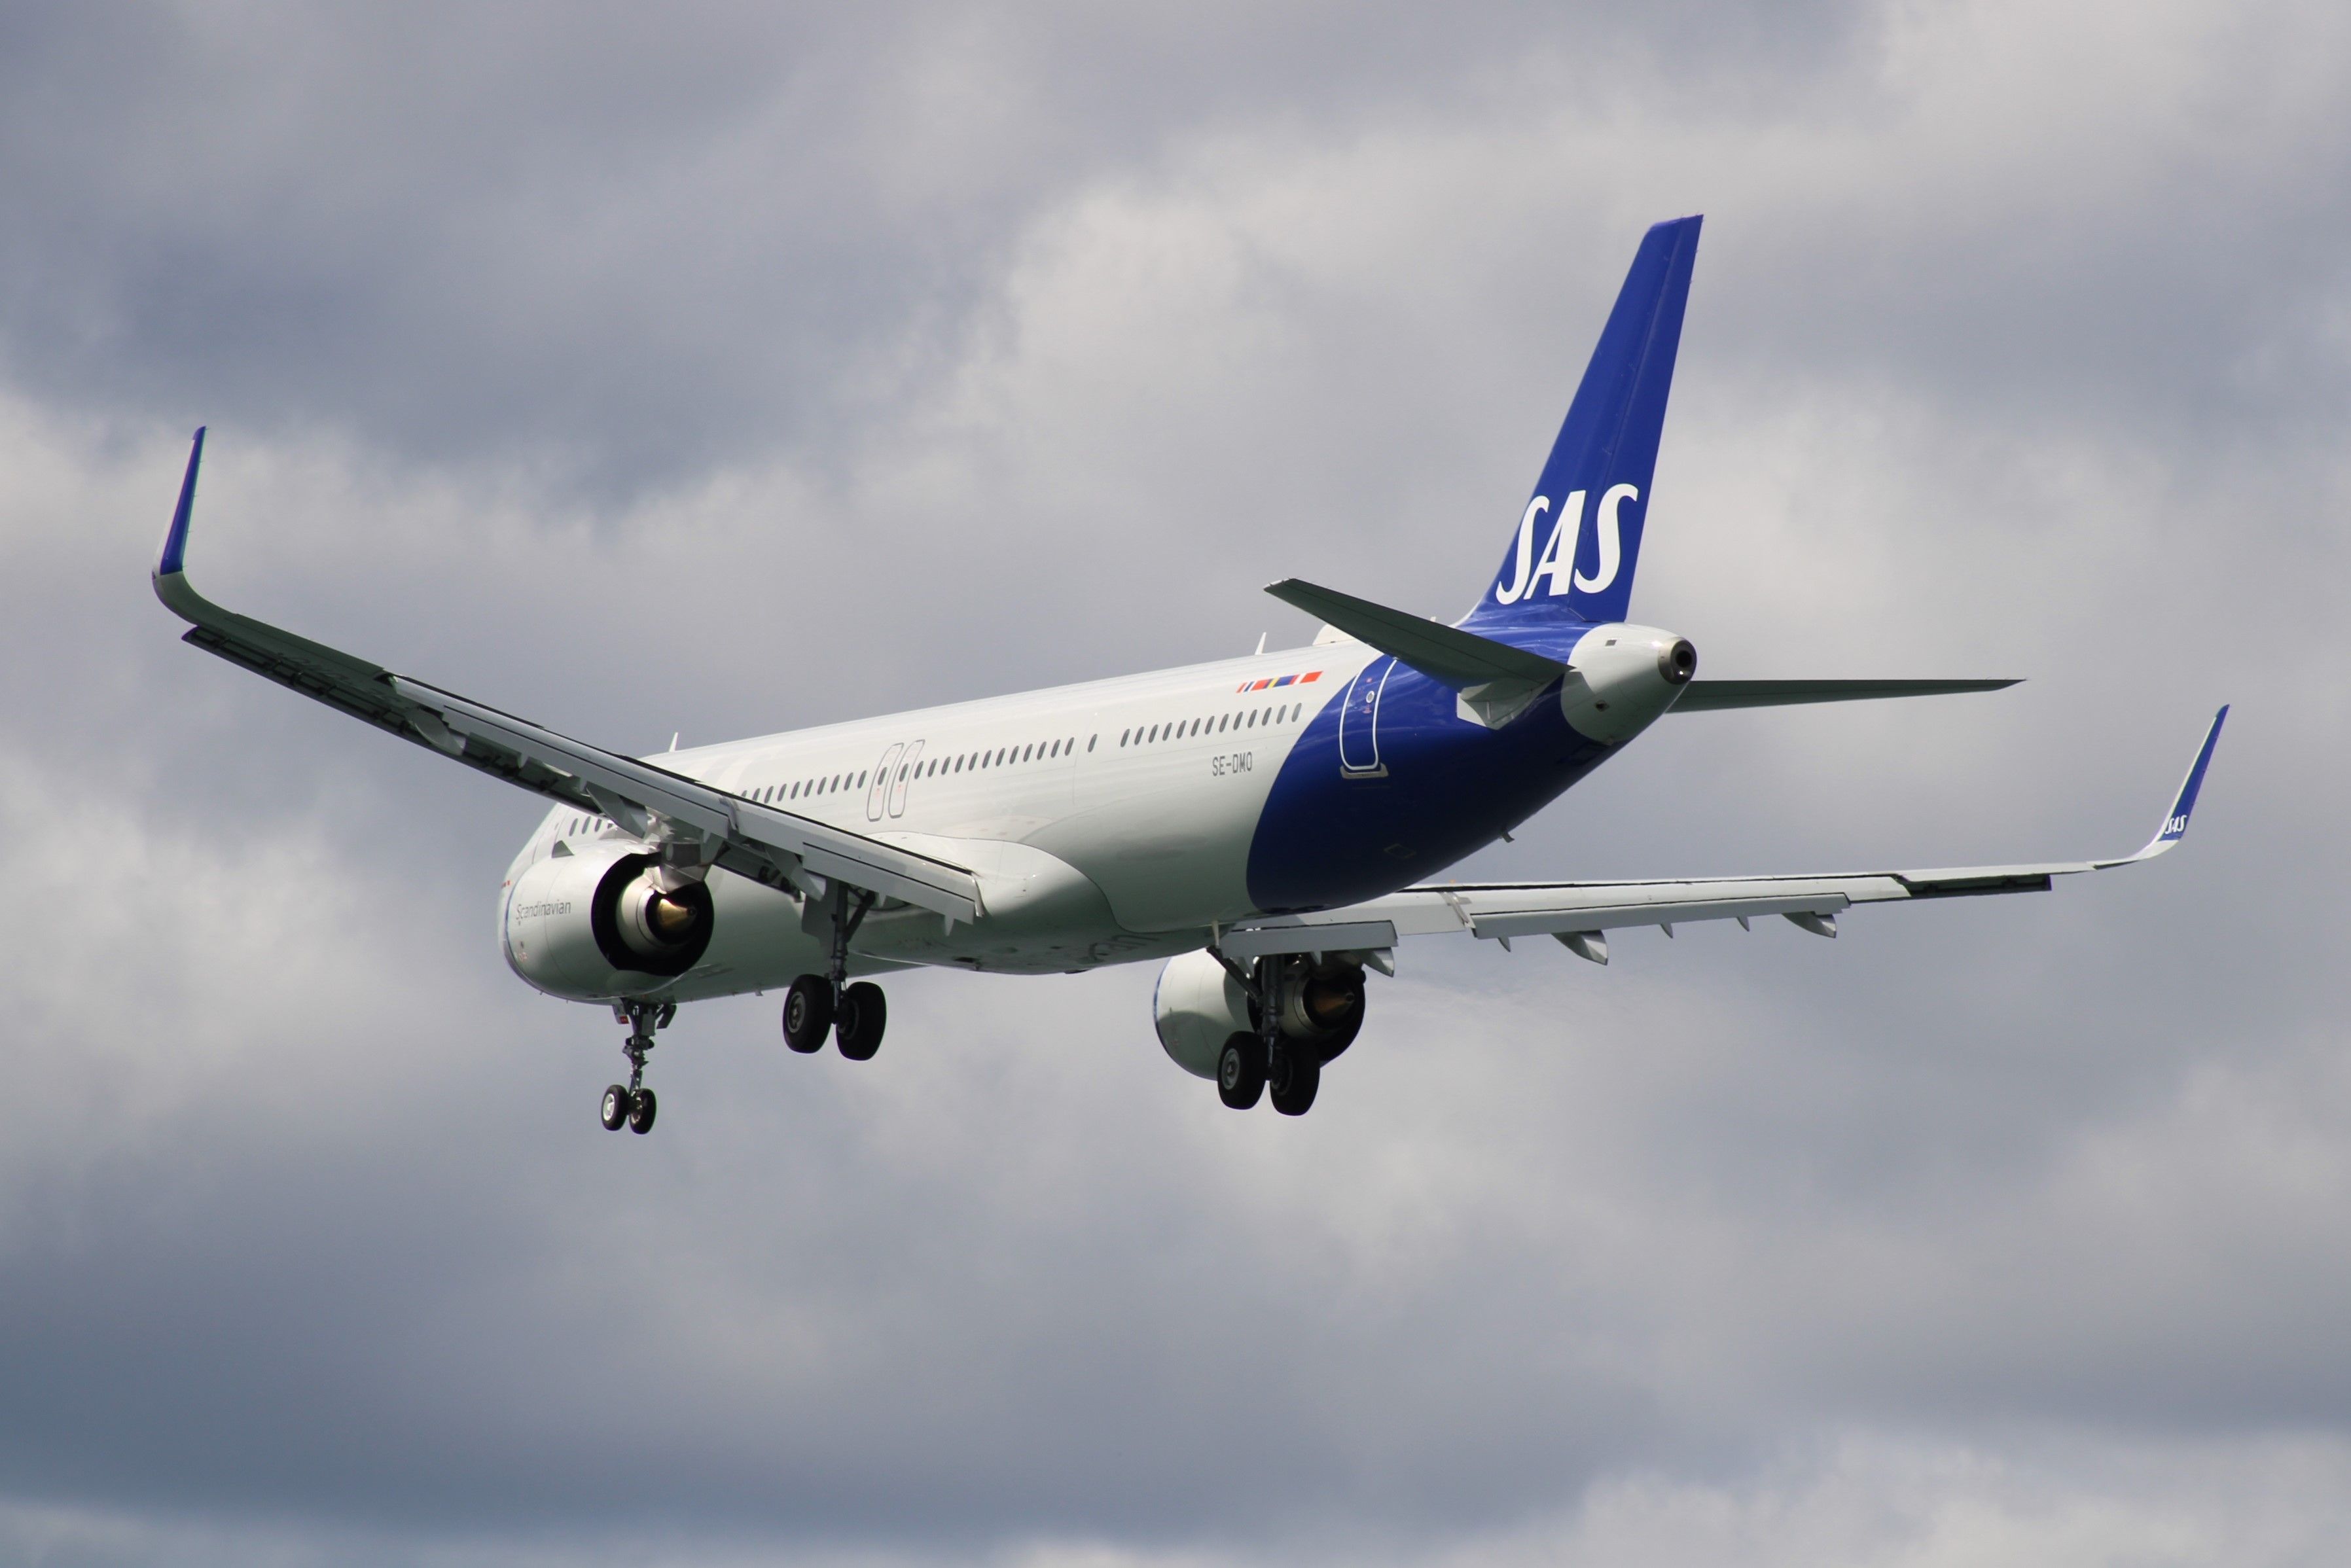 An SAS Airbus A321neo flying in the sky.